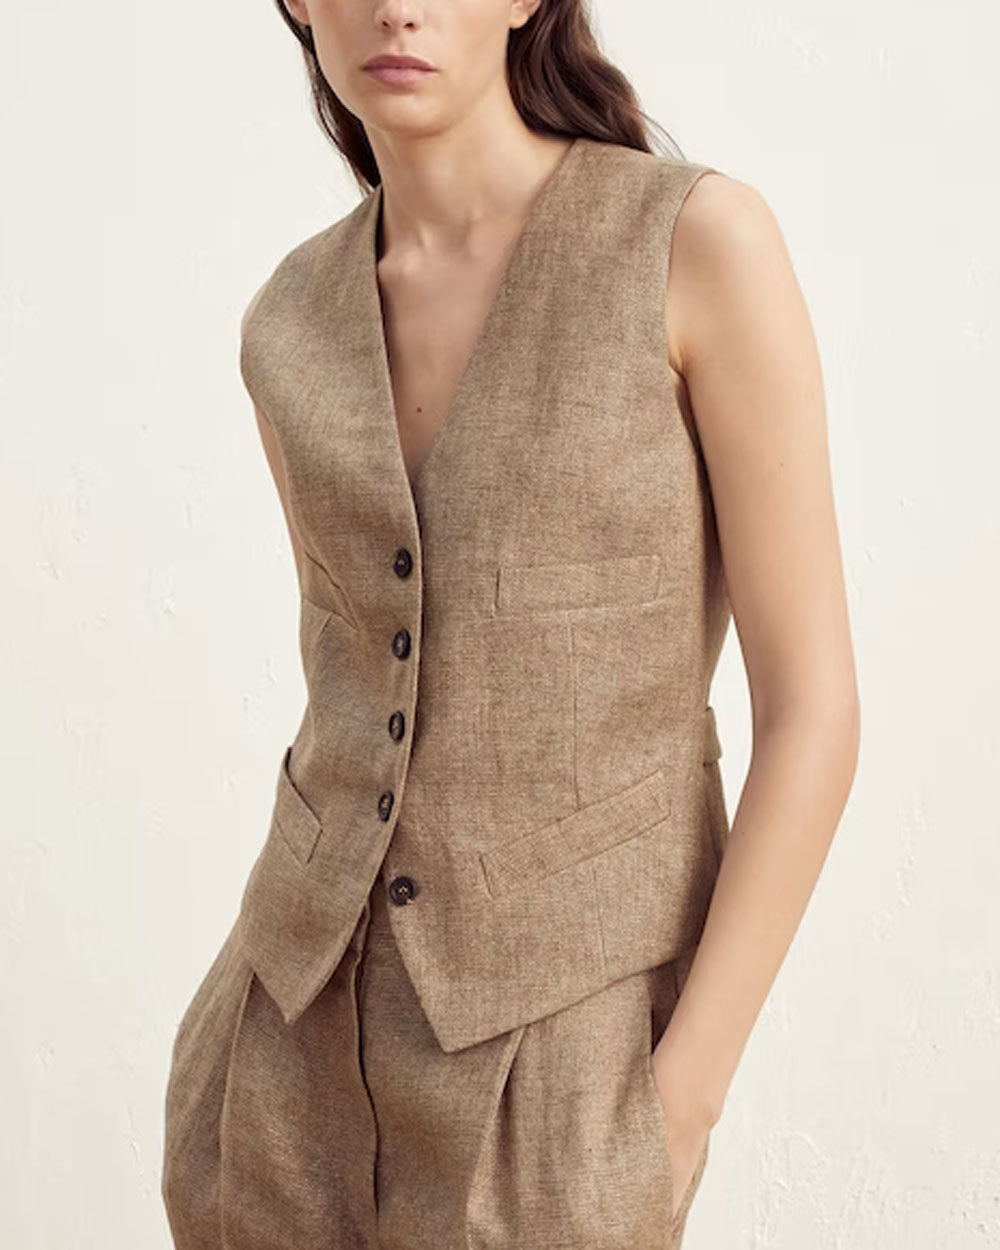 Camel and Loro Sparkling Linen Vest